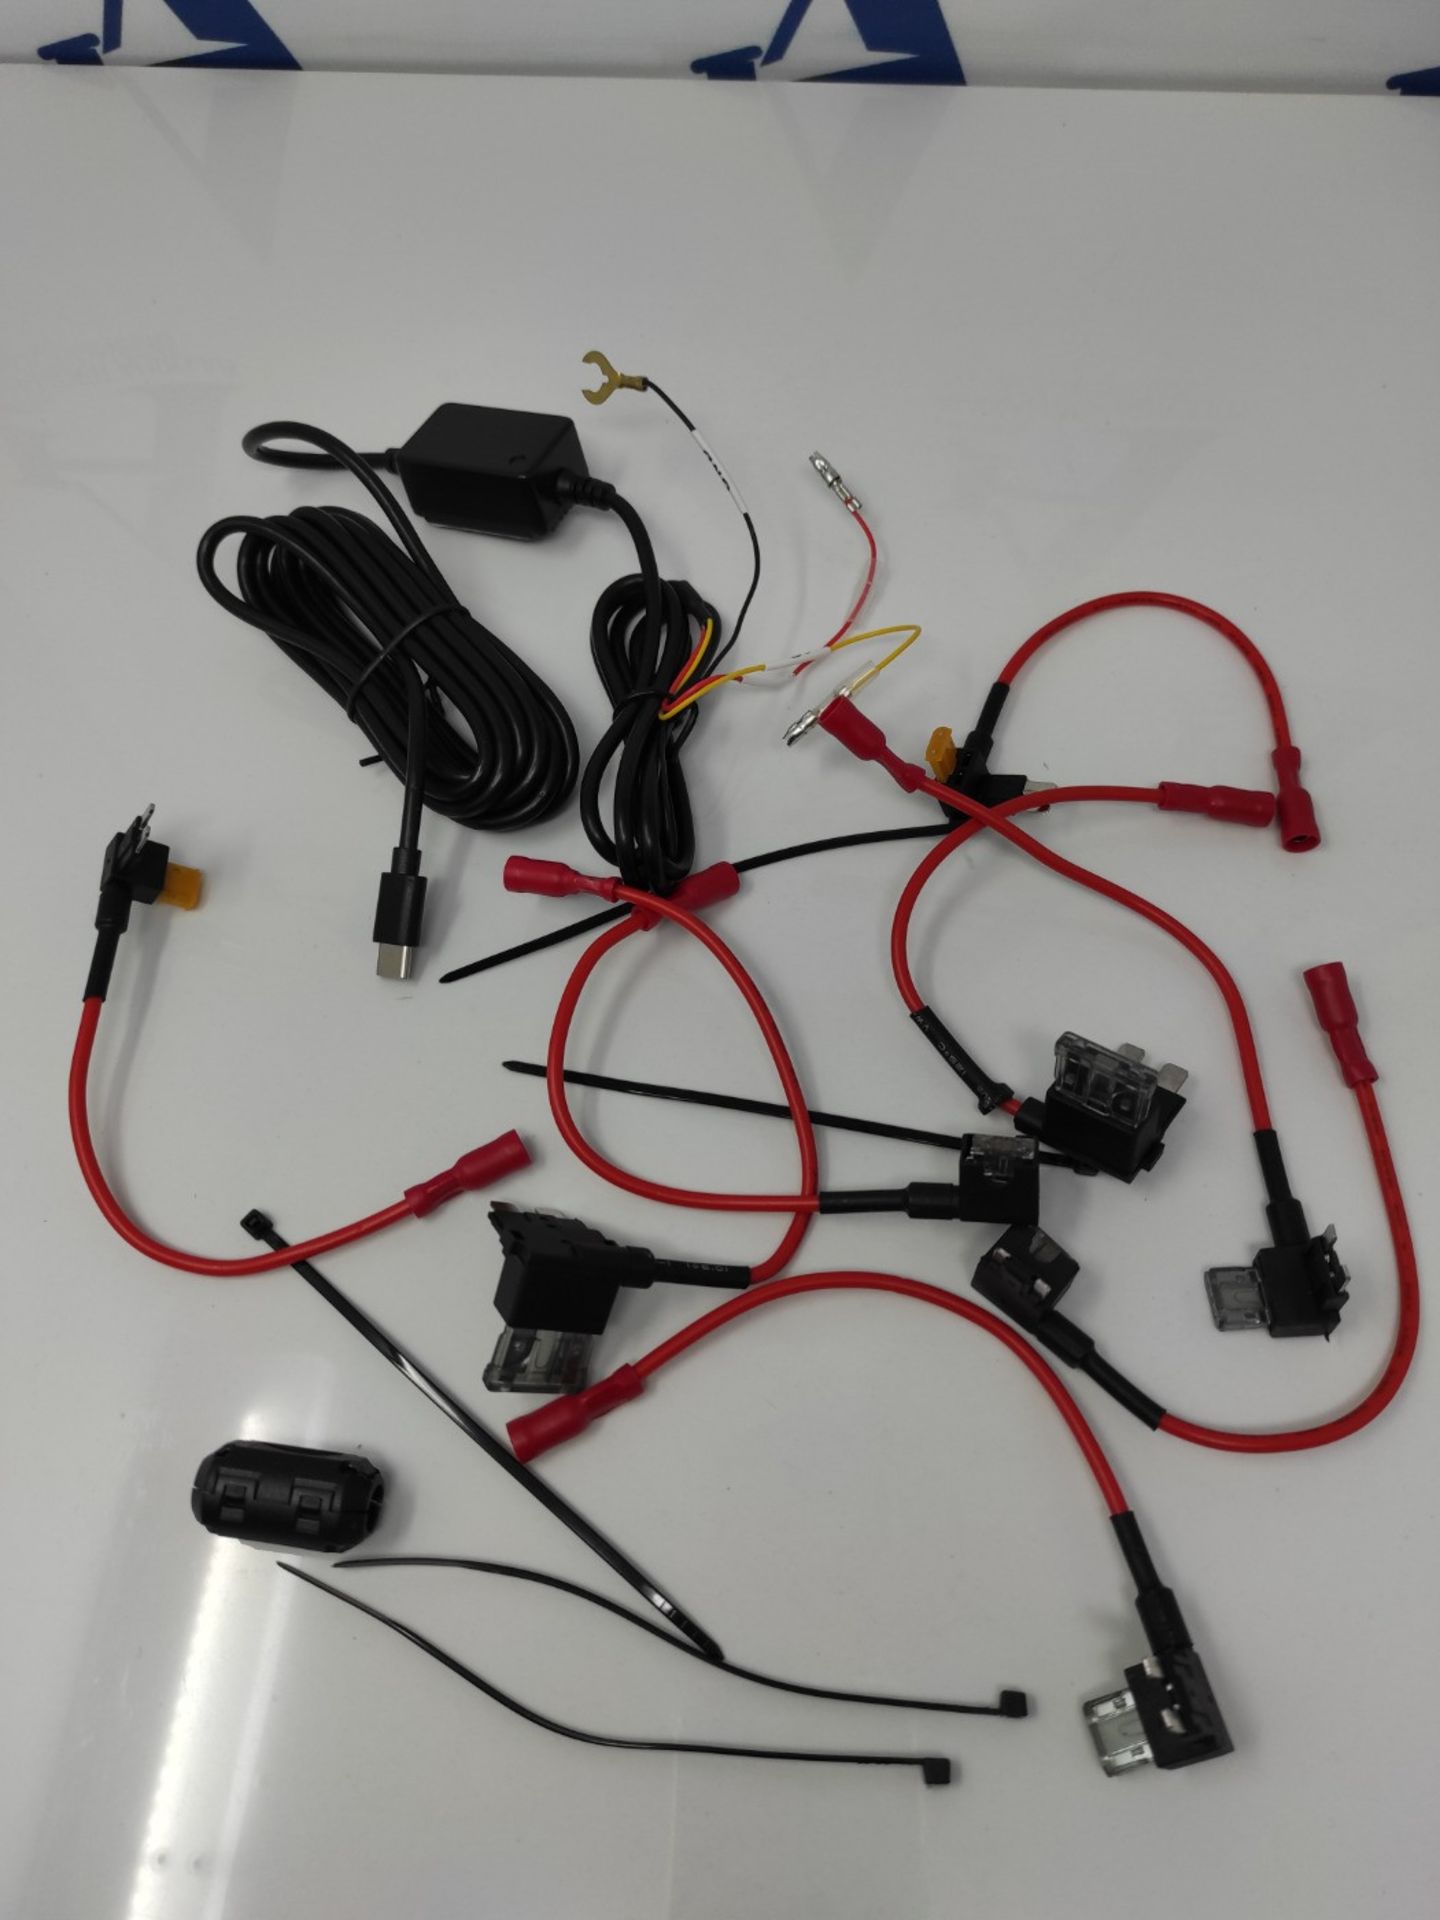 Road Angel Hard Wiring Kit for Road Angel Halo Ultra and Pure Touch/Vision. Enables al - Image 2 of 2